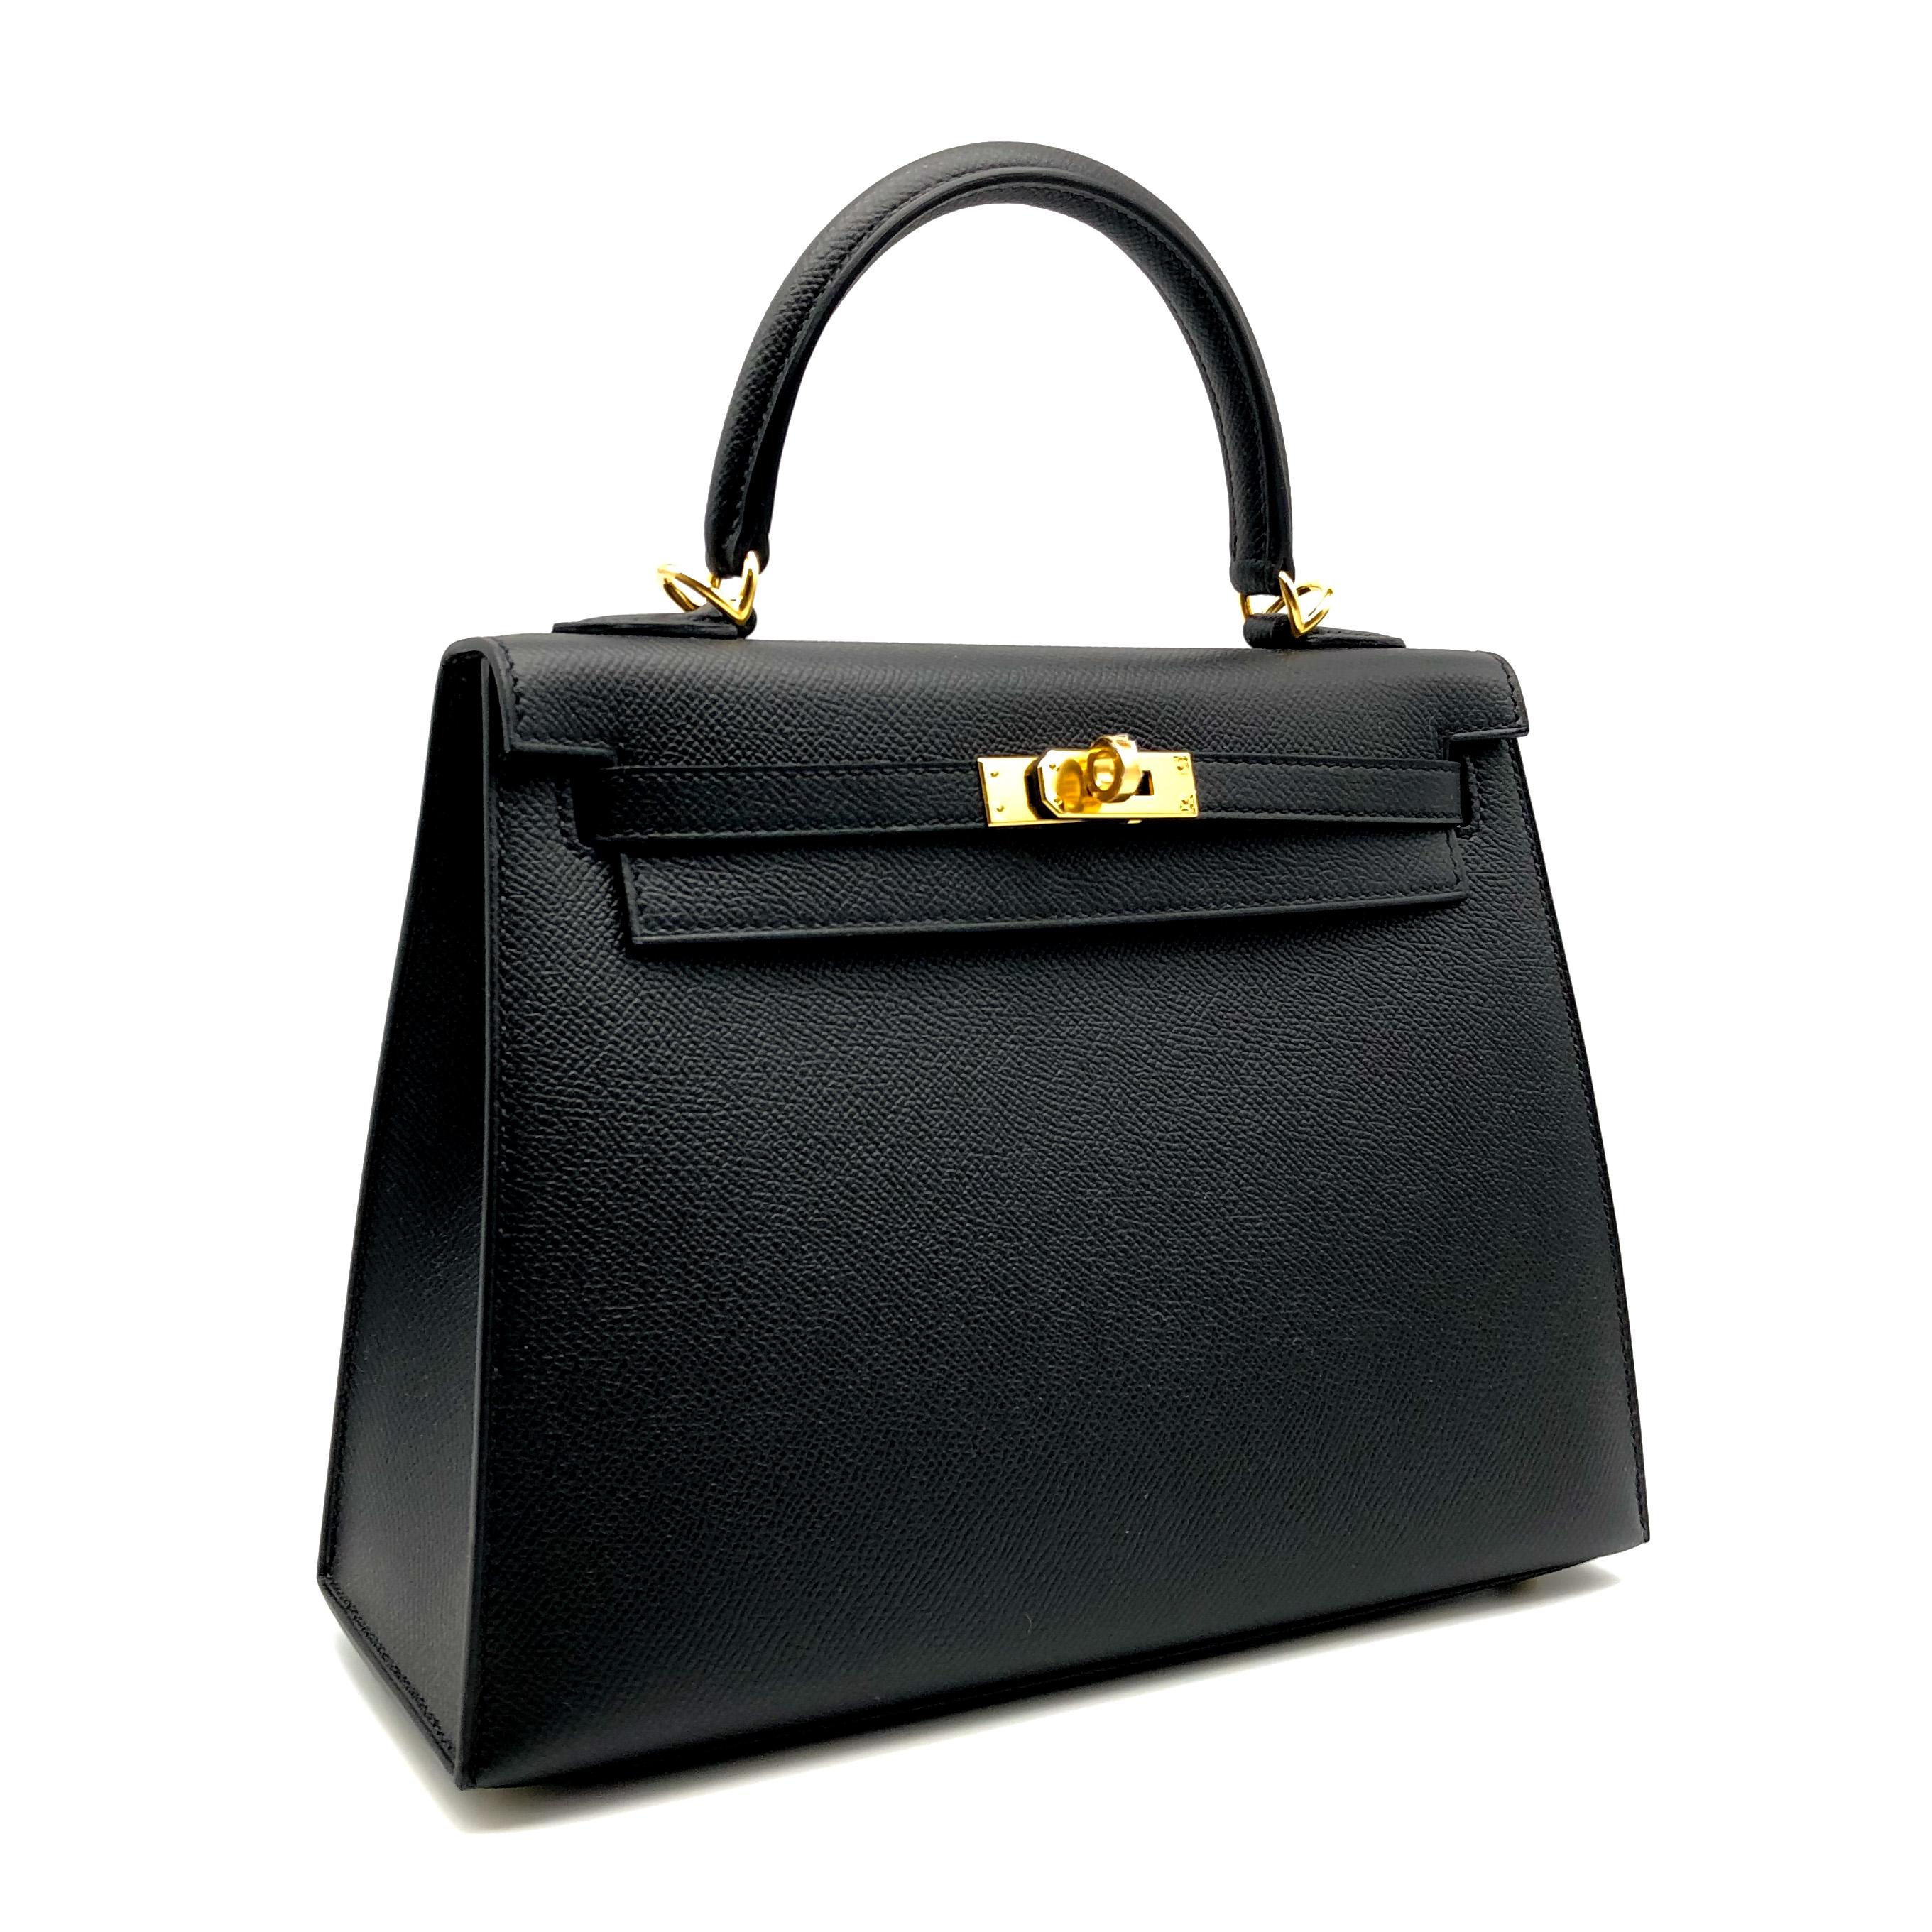 Brand: Hermès 
Style: Kelly Sellier
Size: 25cm
Color: Black
Leather: Epsom
Hardware: Gold
Stamp: 2020 Y

Condition: Pristine, never carried: The item has never been carried and is in pristine condition complete with all accessories.

Accompanied by: